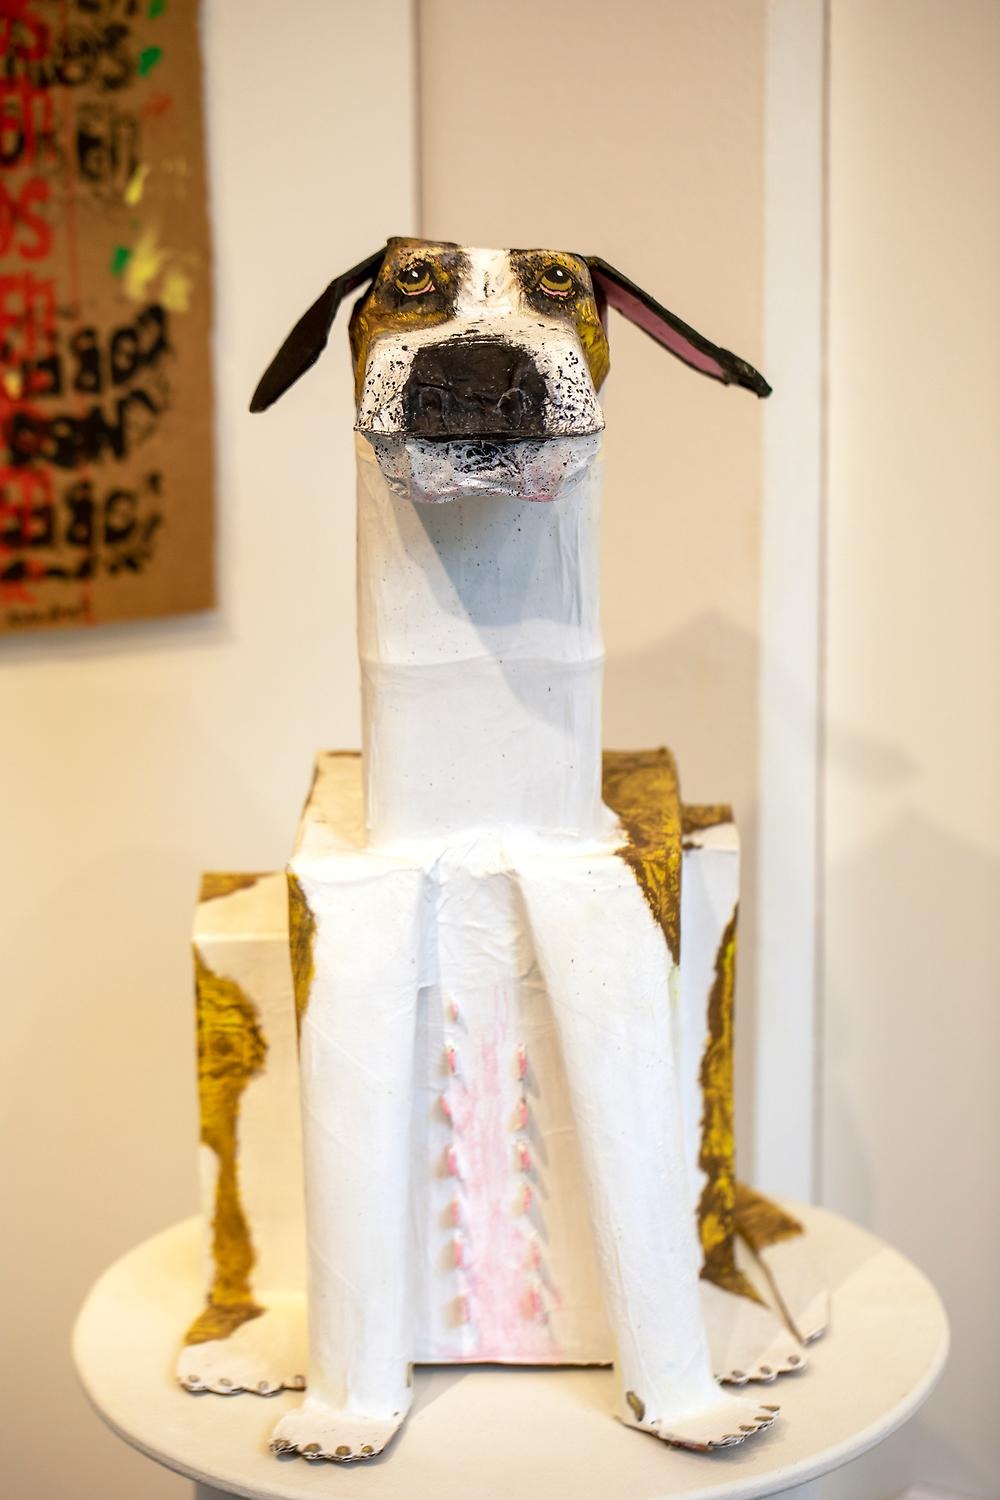 A sculpture. The sculpture represents a dog. It is made of toilet rolls, cardboard and is painted white and brown.